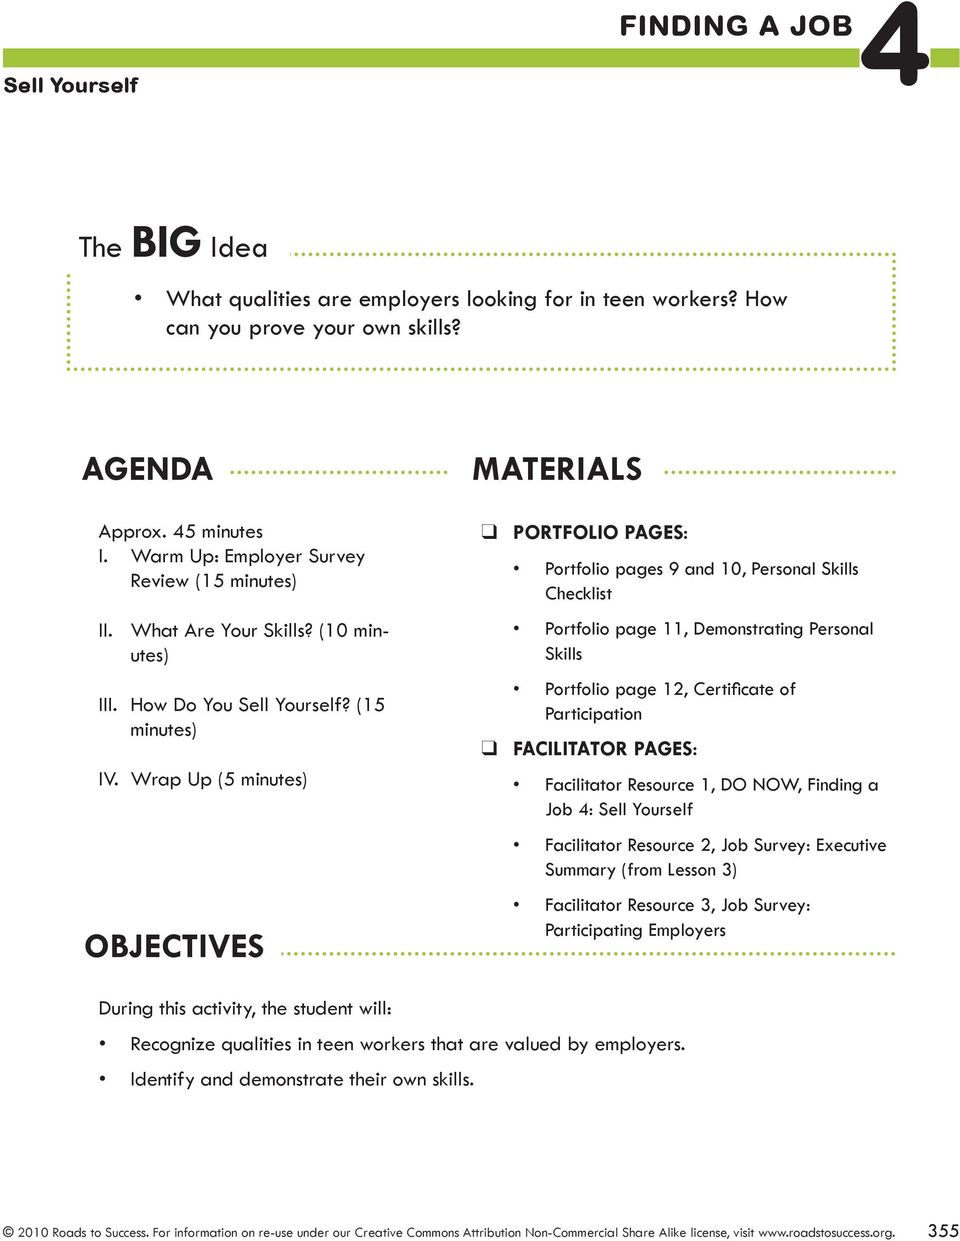 Wrap Up (5 minutes) OBJECTIVES MATERIALS portfolio PAGES: Portfolio pages 9 and 10, Personal Skills Checklist Portfolio page 11, Demonstrating Personal Skills Portfolio page 12, Certificate of